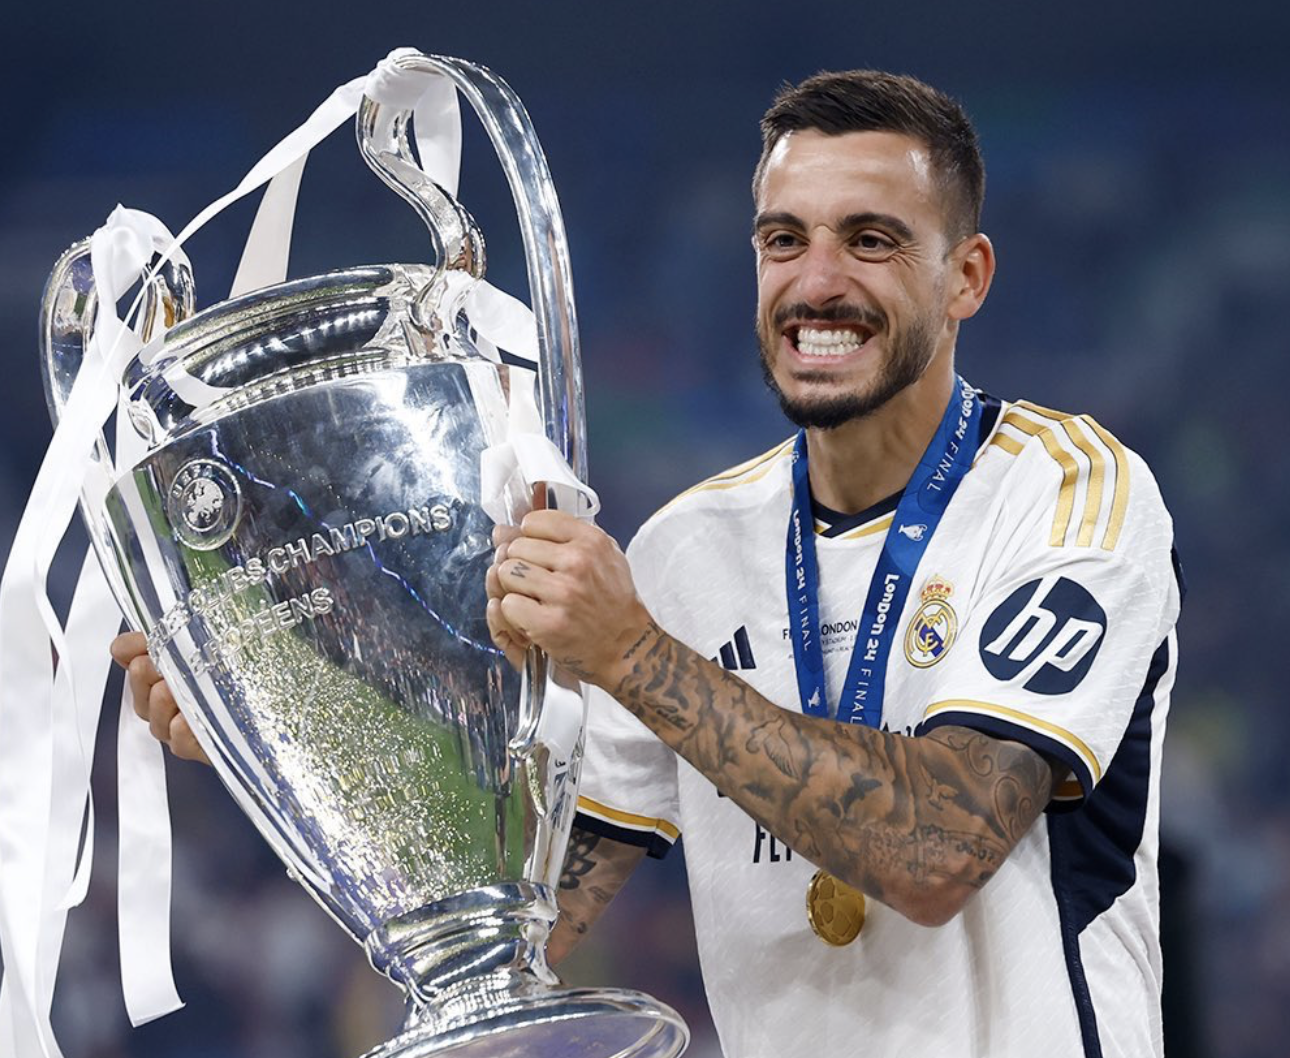 Joselu to leave Real Madrid after receiving offer from Qatar’s Al Gharafa: reports